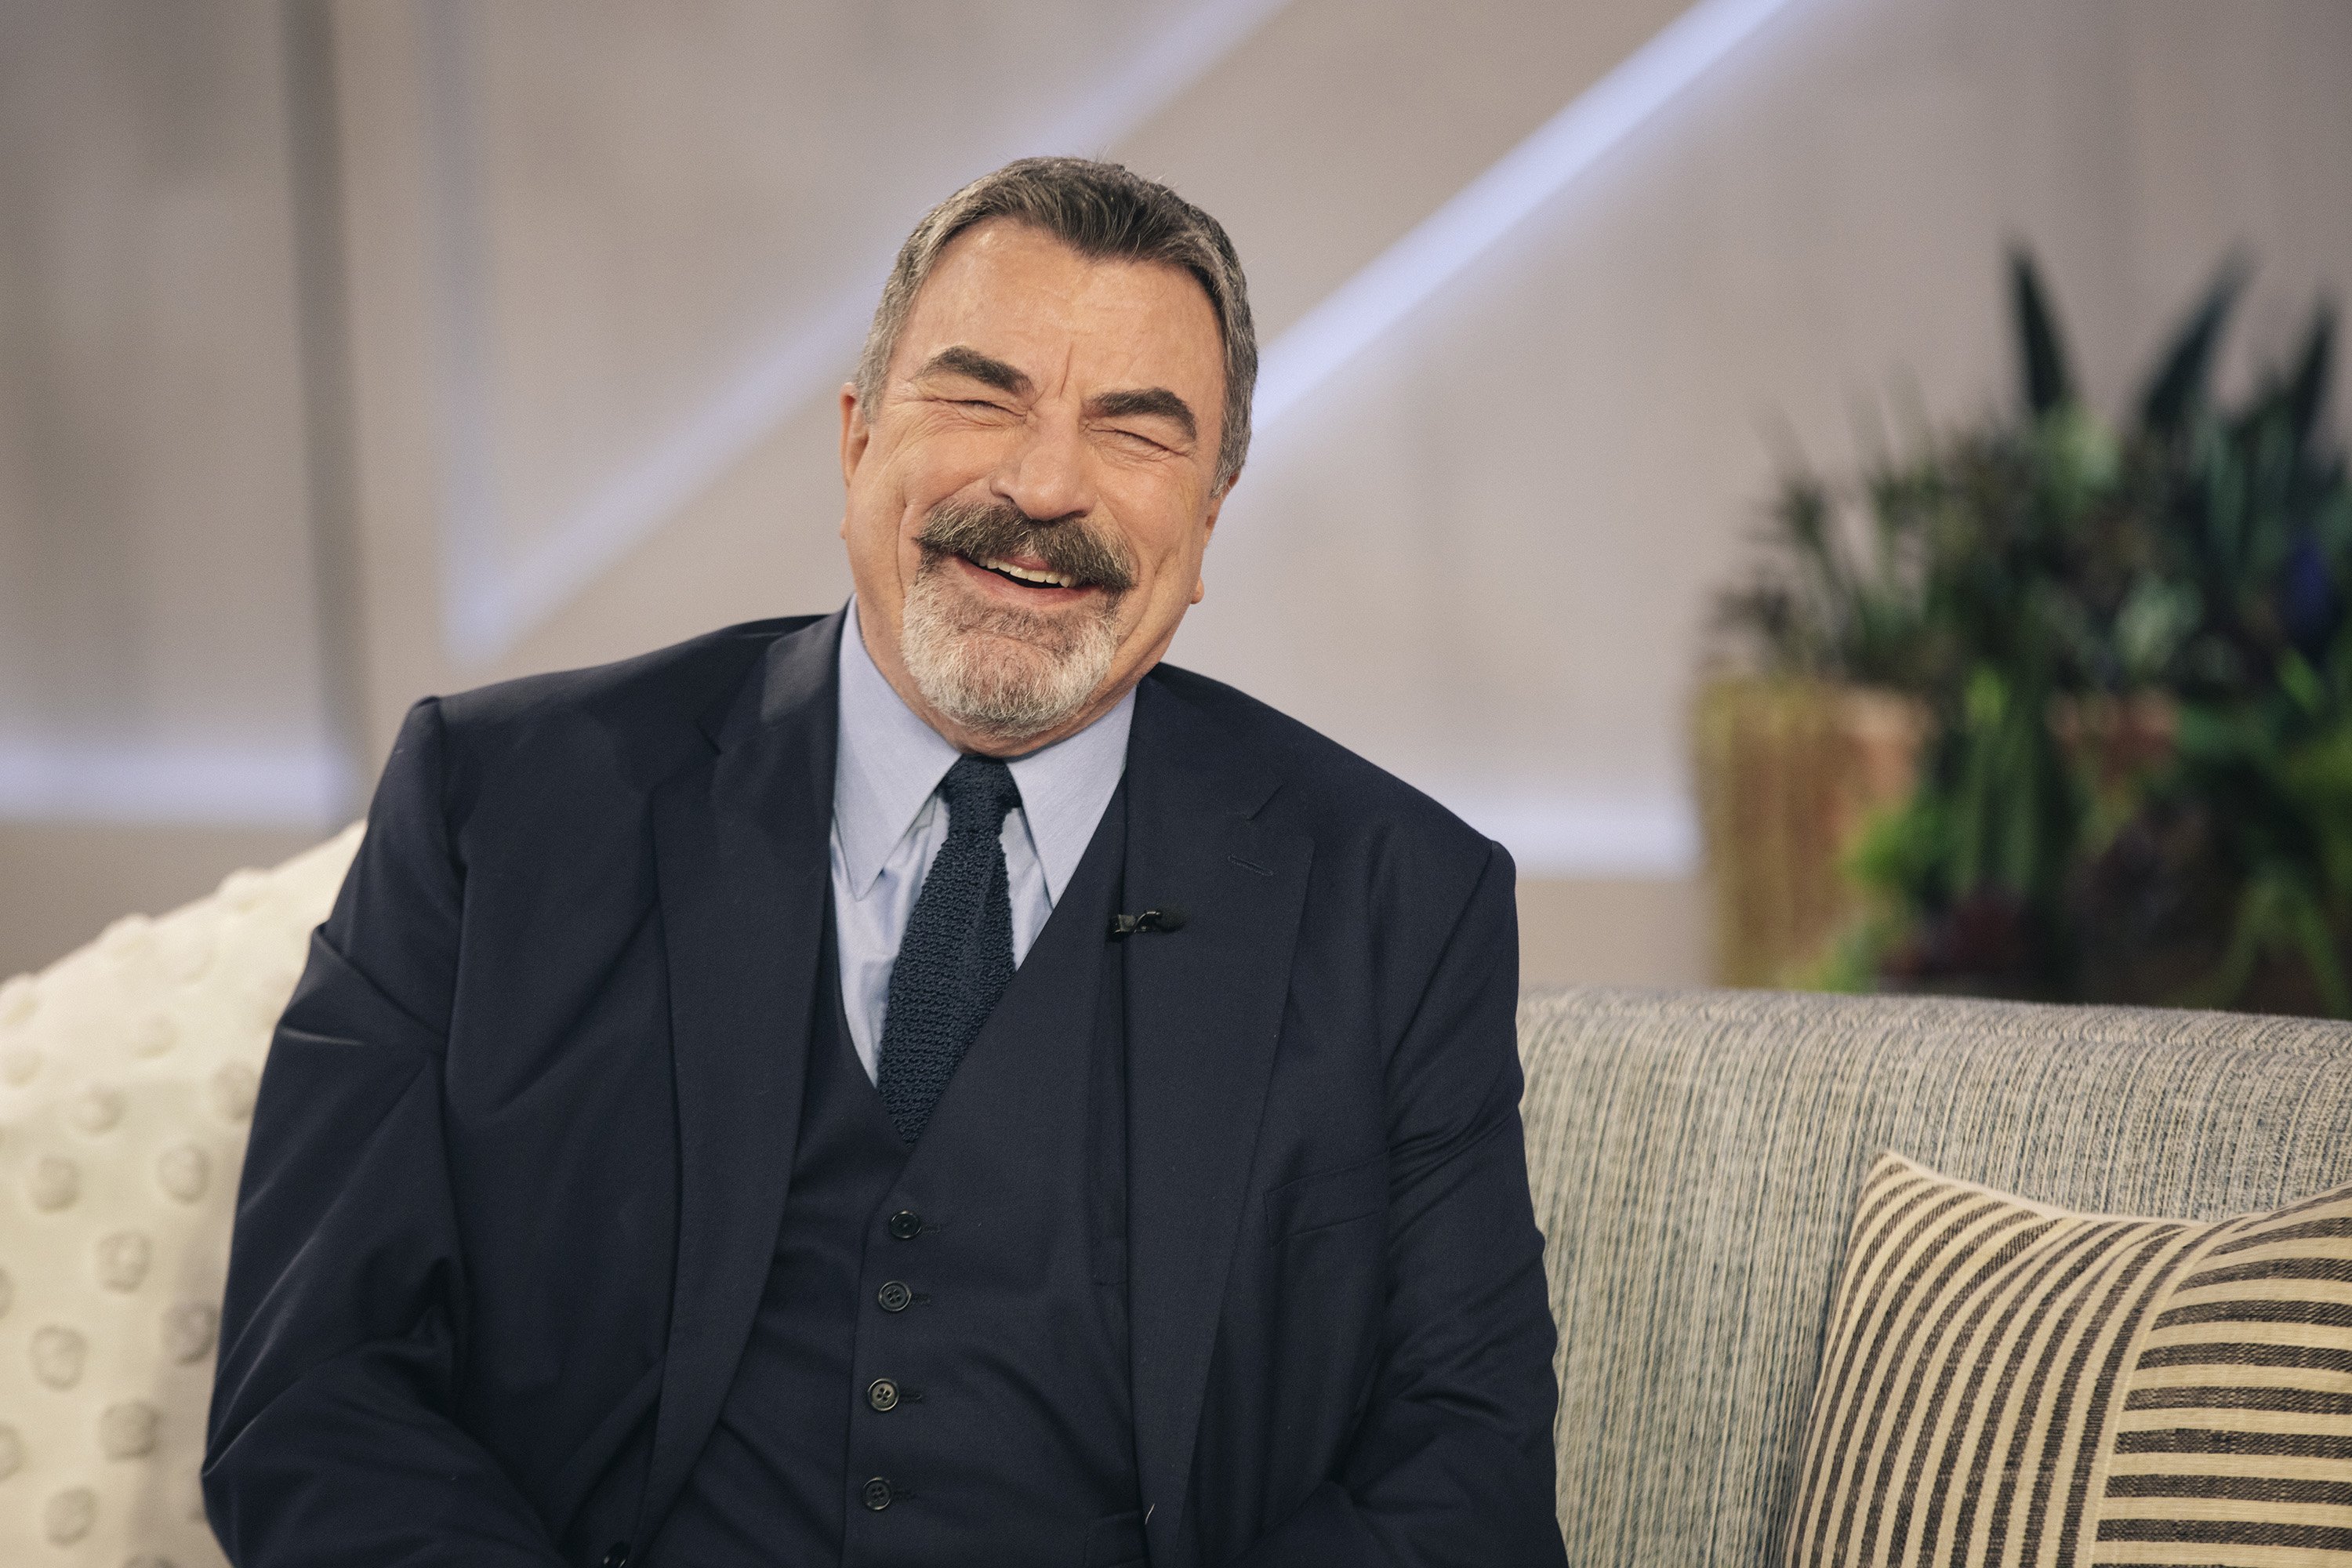 Tom Selleck in der "Kelly Clarkson Show". | Quelle: Getty Images